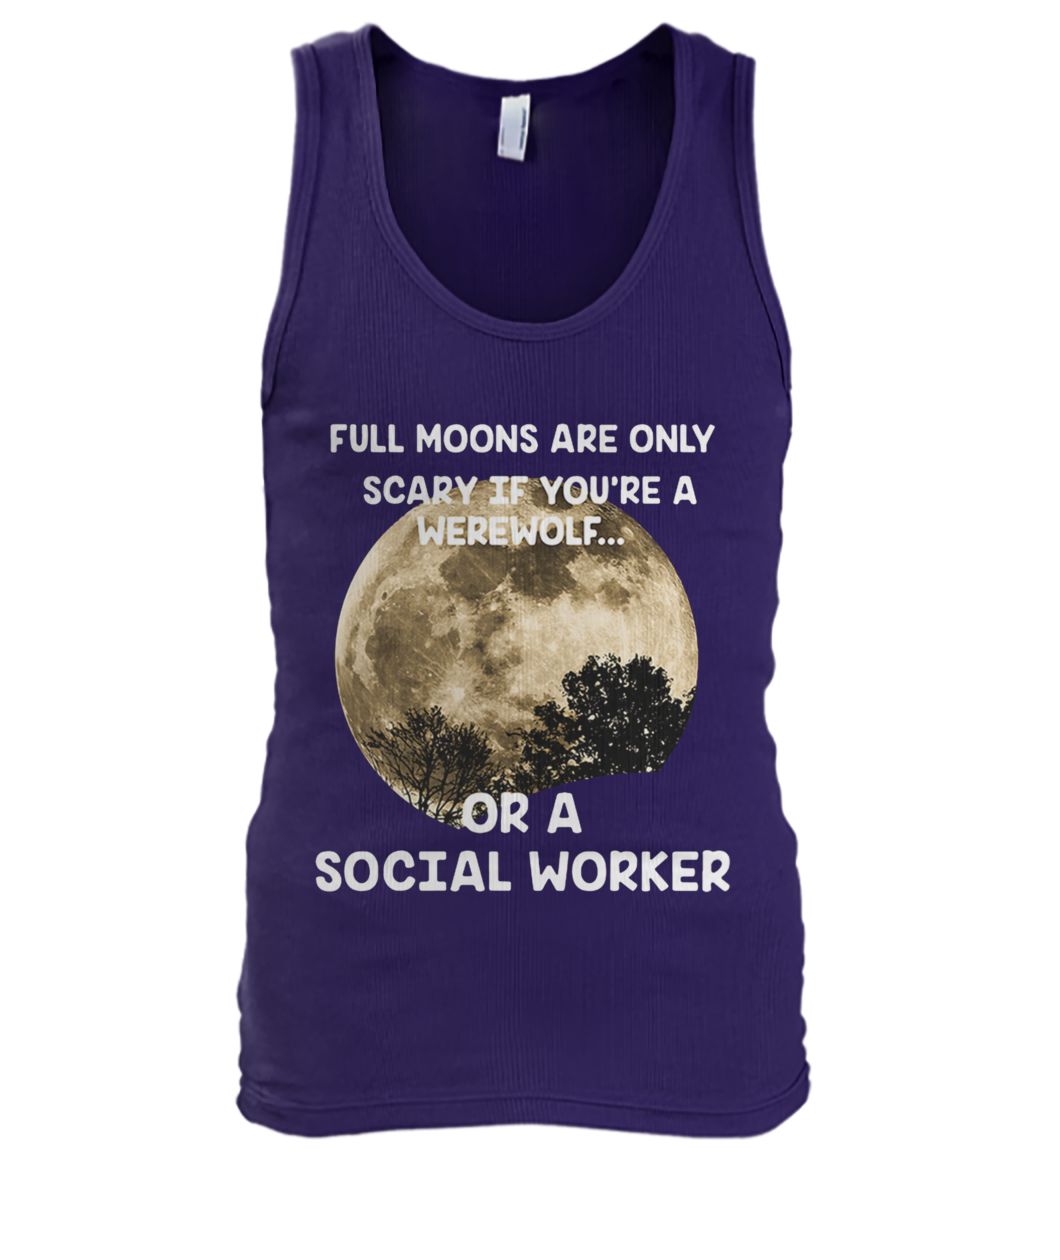 Full moons are only scary if you’re a werewolf or a social worker men's tank top